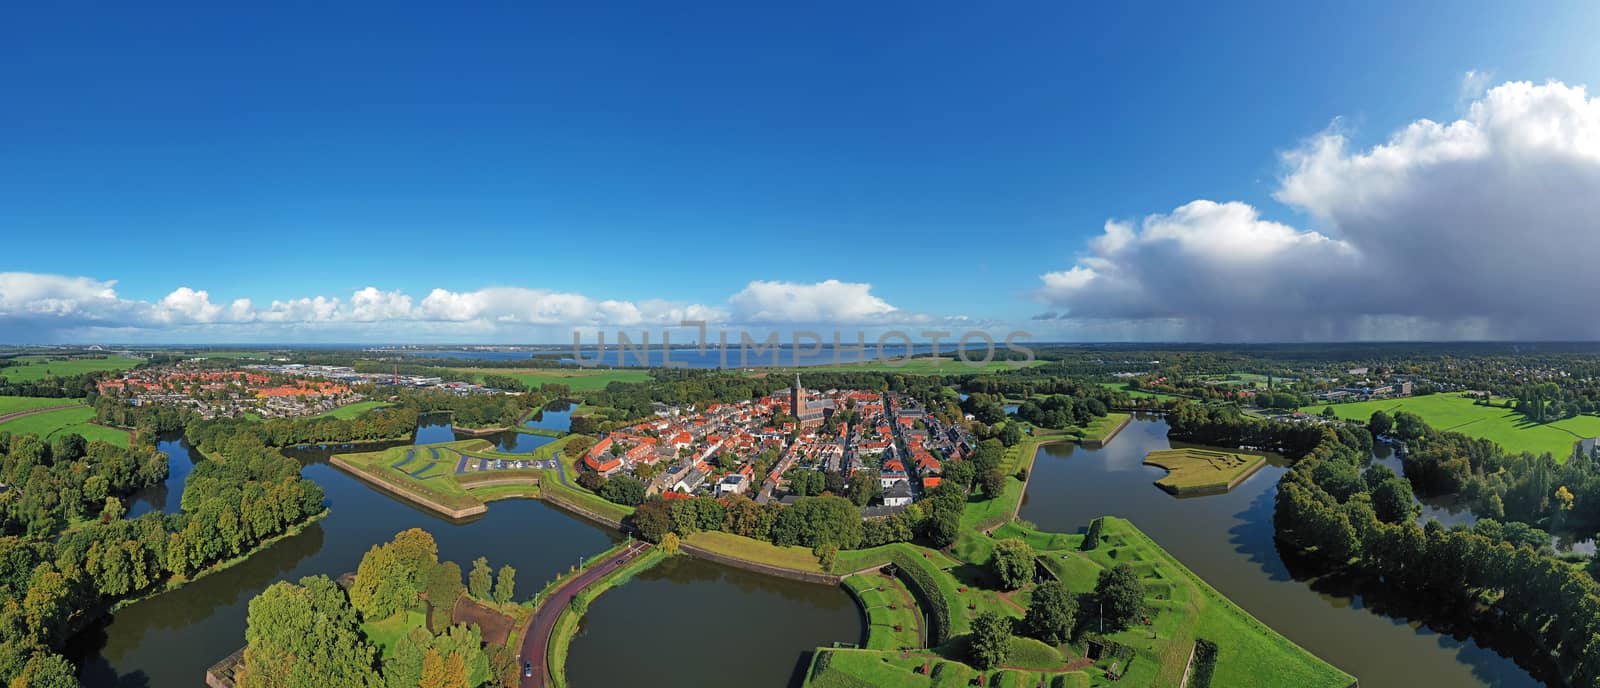 Aerial panorama from historical Naarden Vesting in the Netherlan by devy